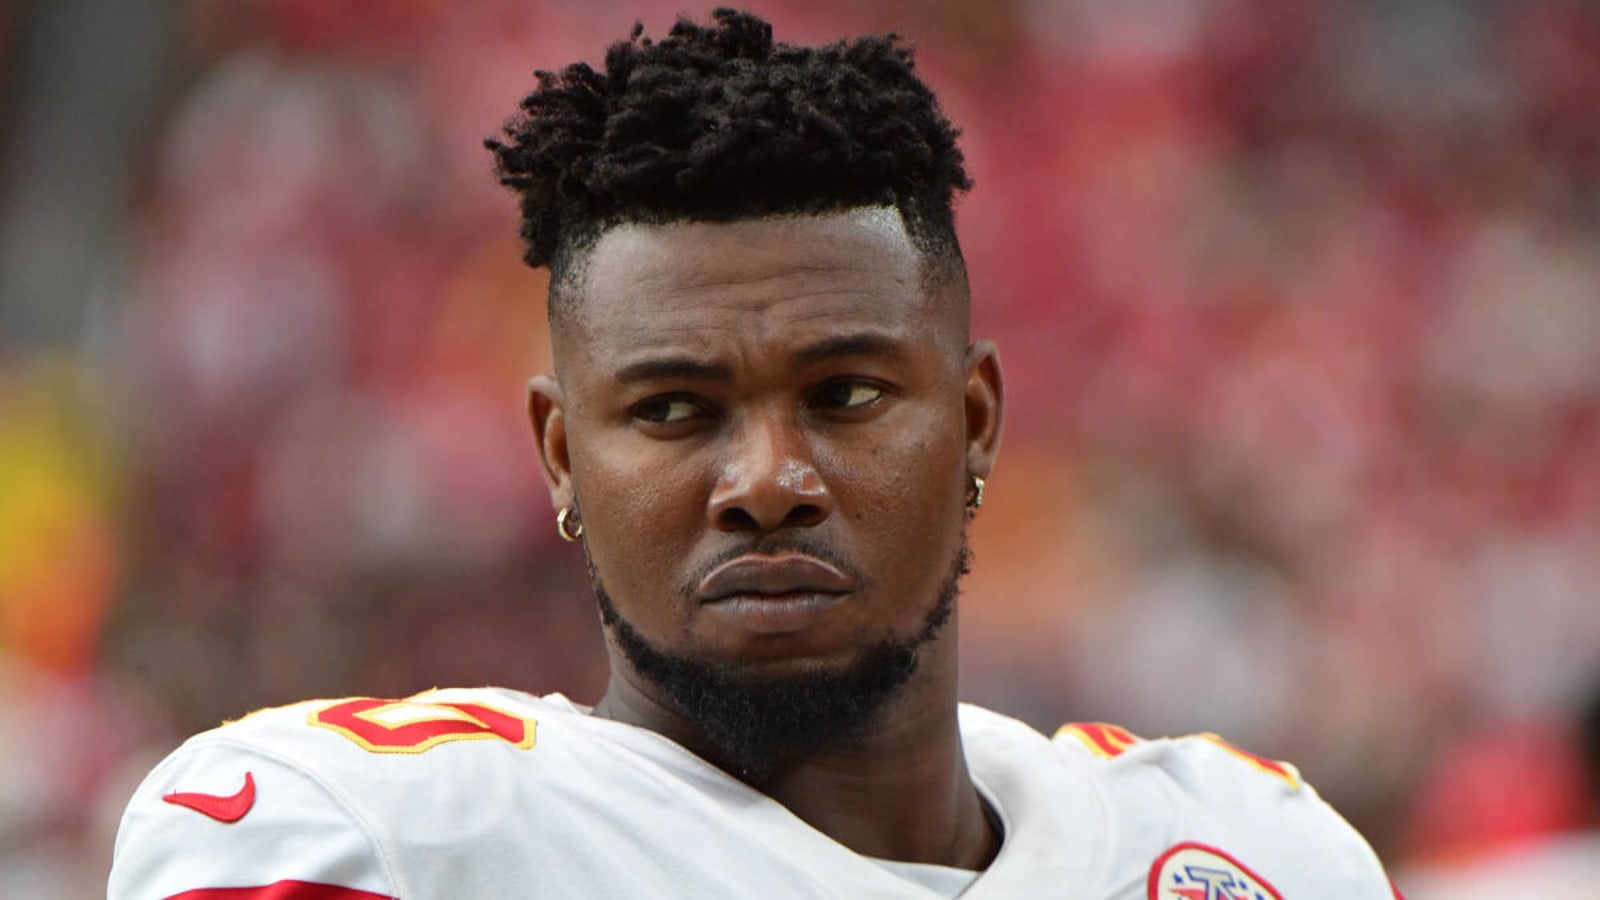 Chiefs Place Prince Tega Wanogho on IR, Make Multiple Other Roster Moves